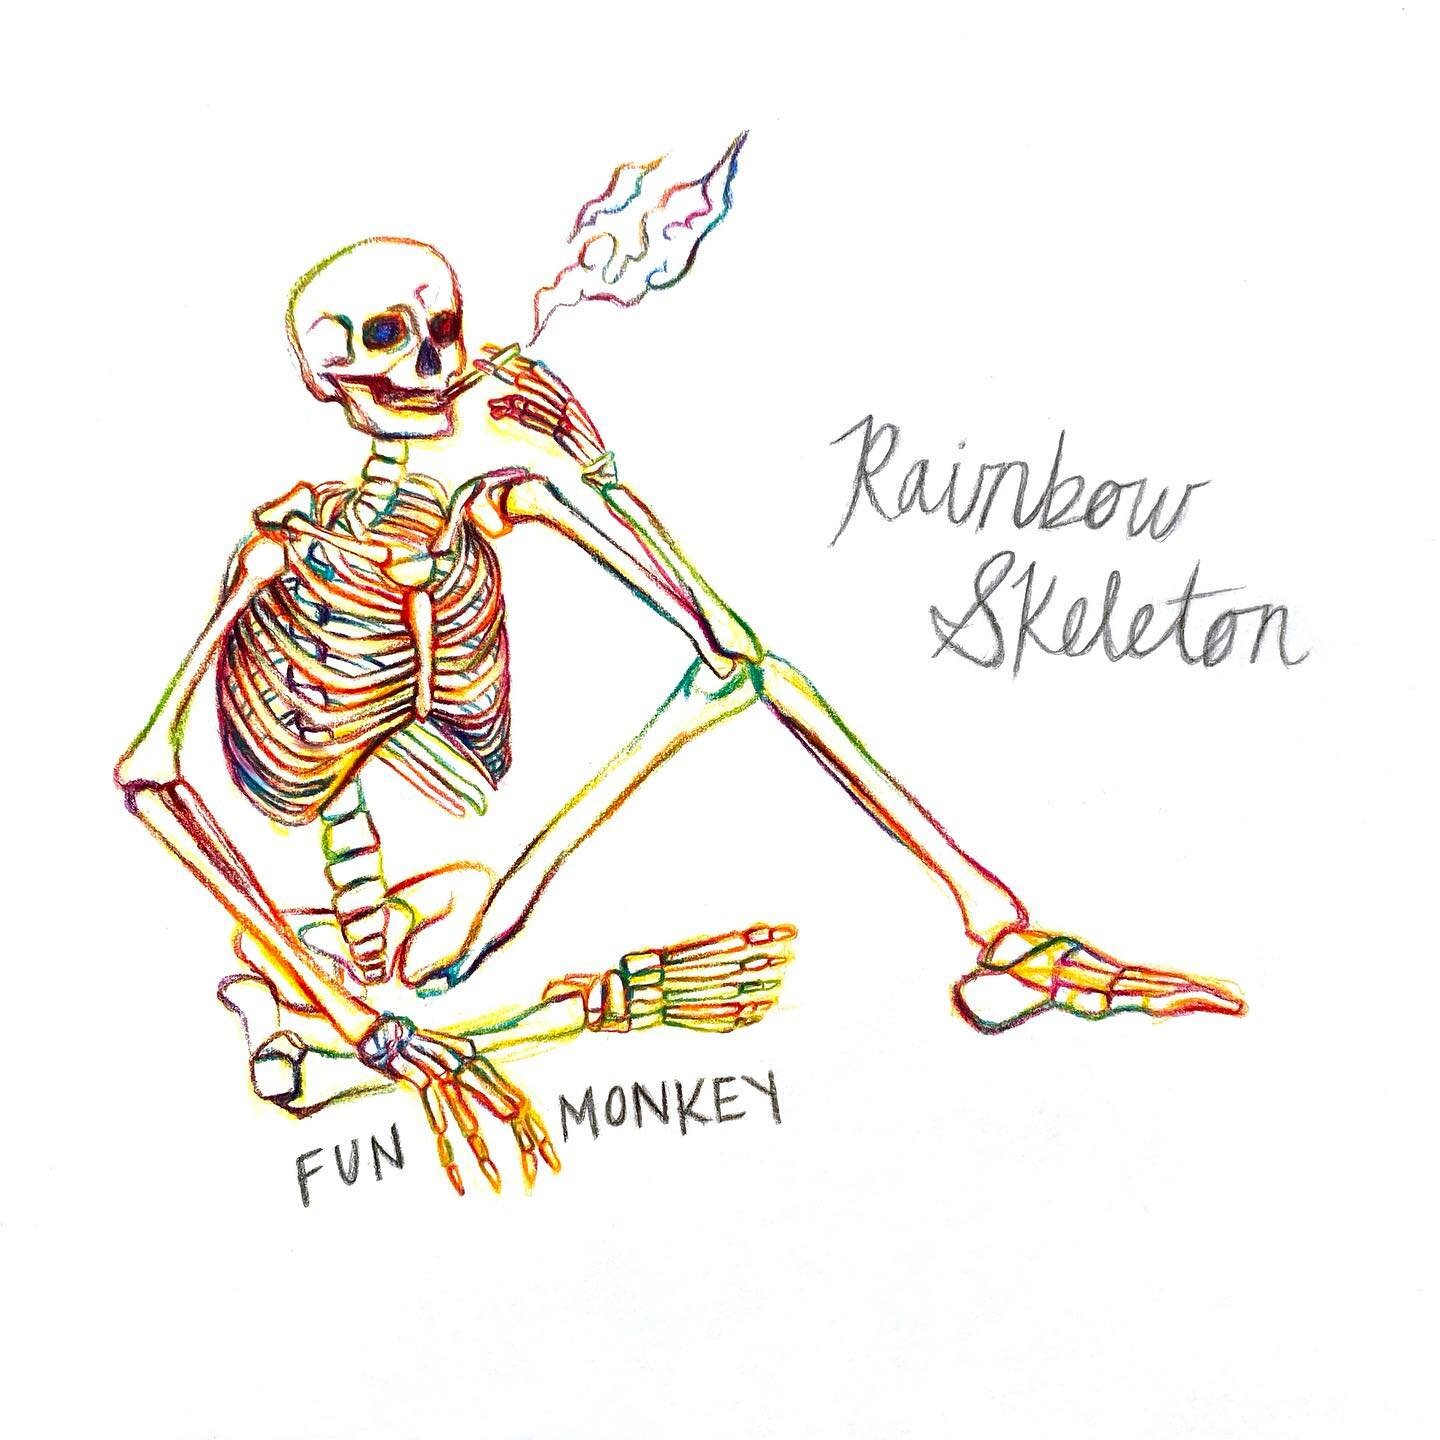 A rainbow skeleton chiller 💀🌈💀for the new @funmonkeyband EP ! first song dropping Friday! 🎸

Music is one of the most prominent sources of inspiration and visions for me 🌟so creating cover art to correlate with specific sounds feels so natural ?